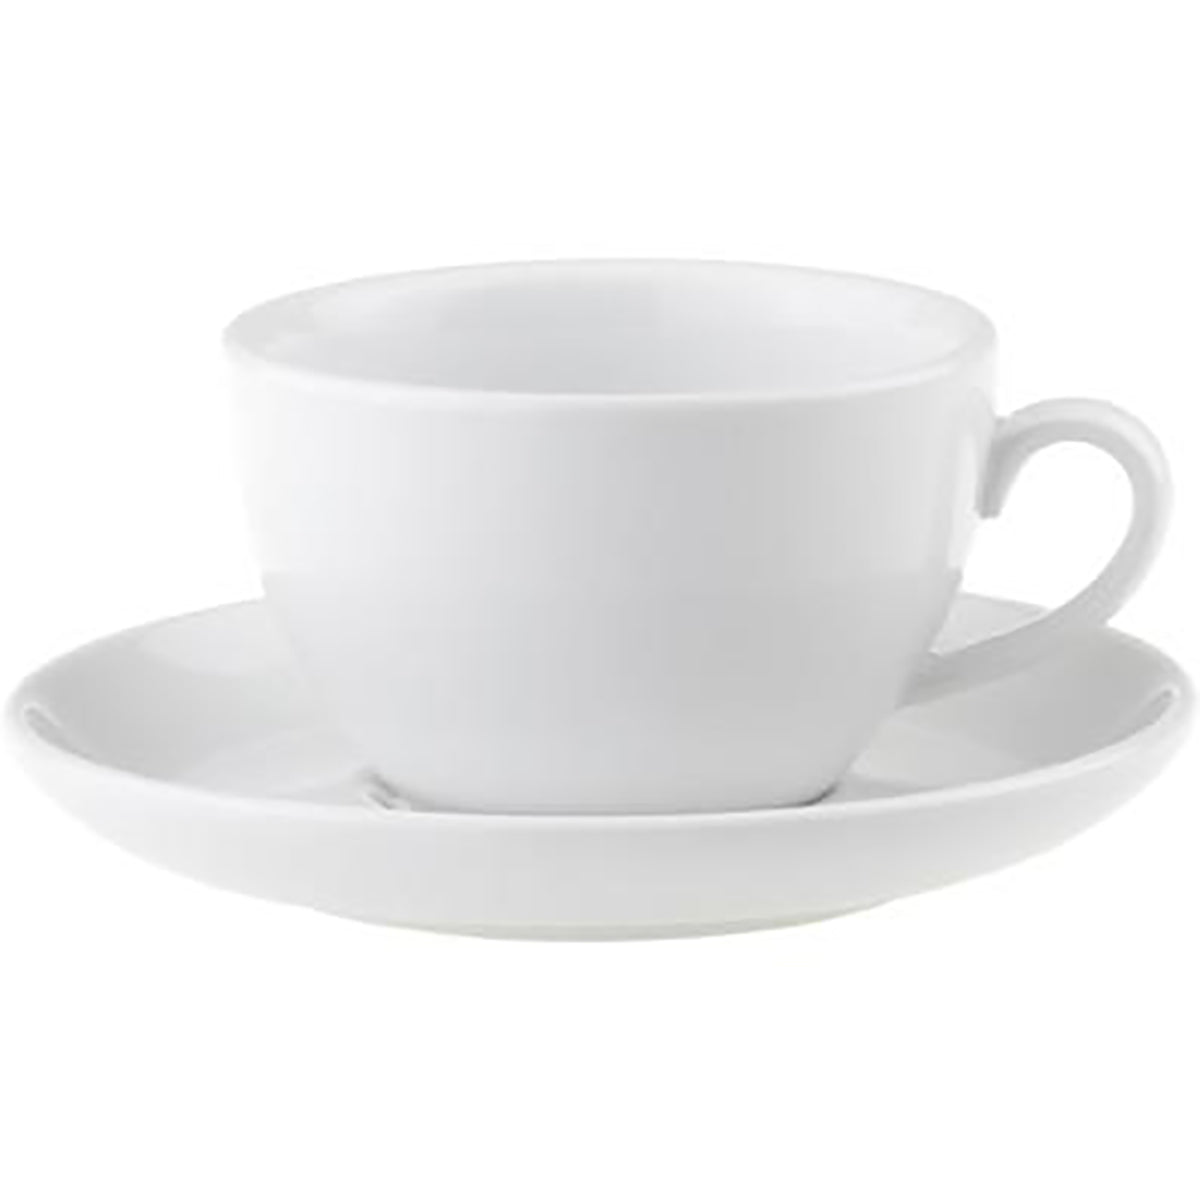 94164 Royal Porcelain Chelsea Cappuccino Cup 0.3Lt For 94165 (0288) Tomkin Australia Hospitality Supplies